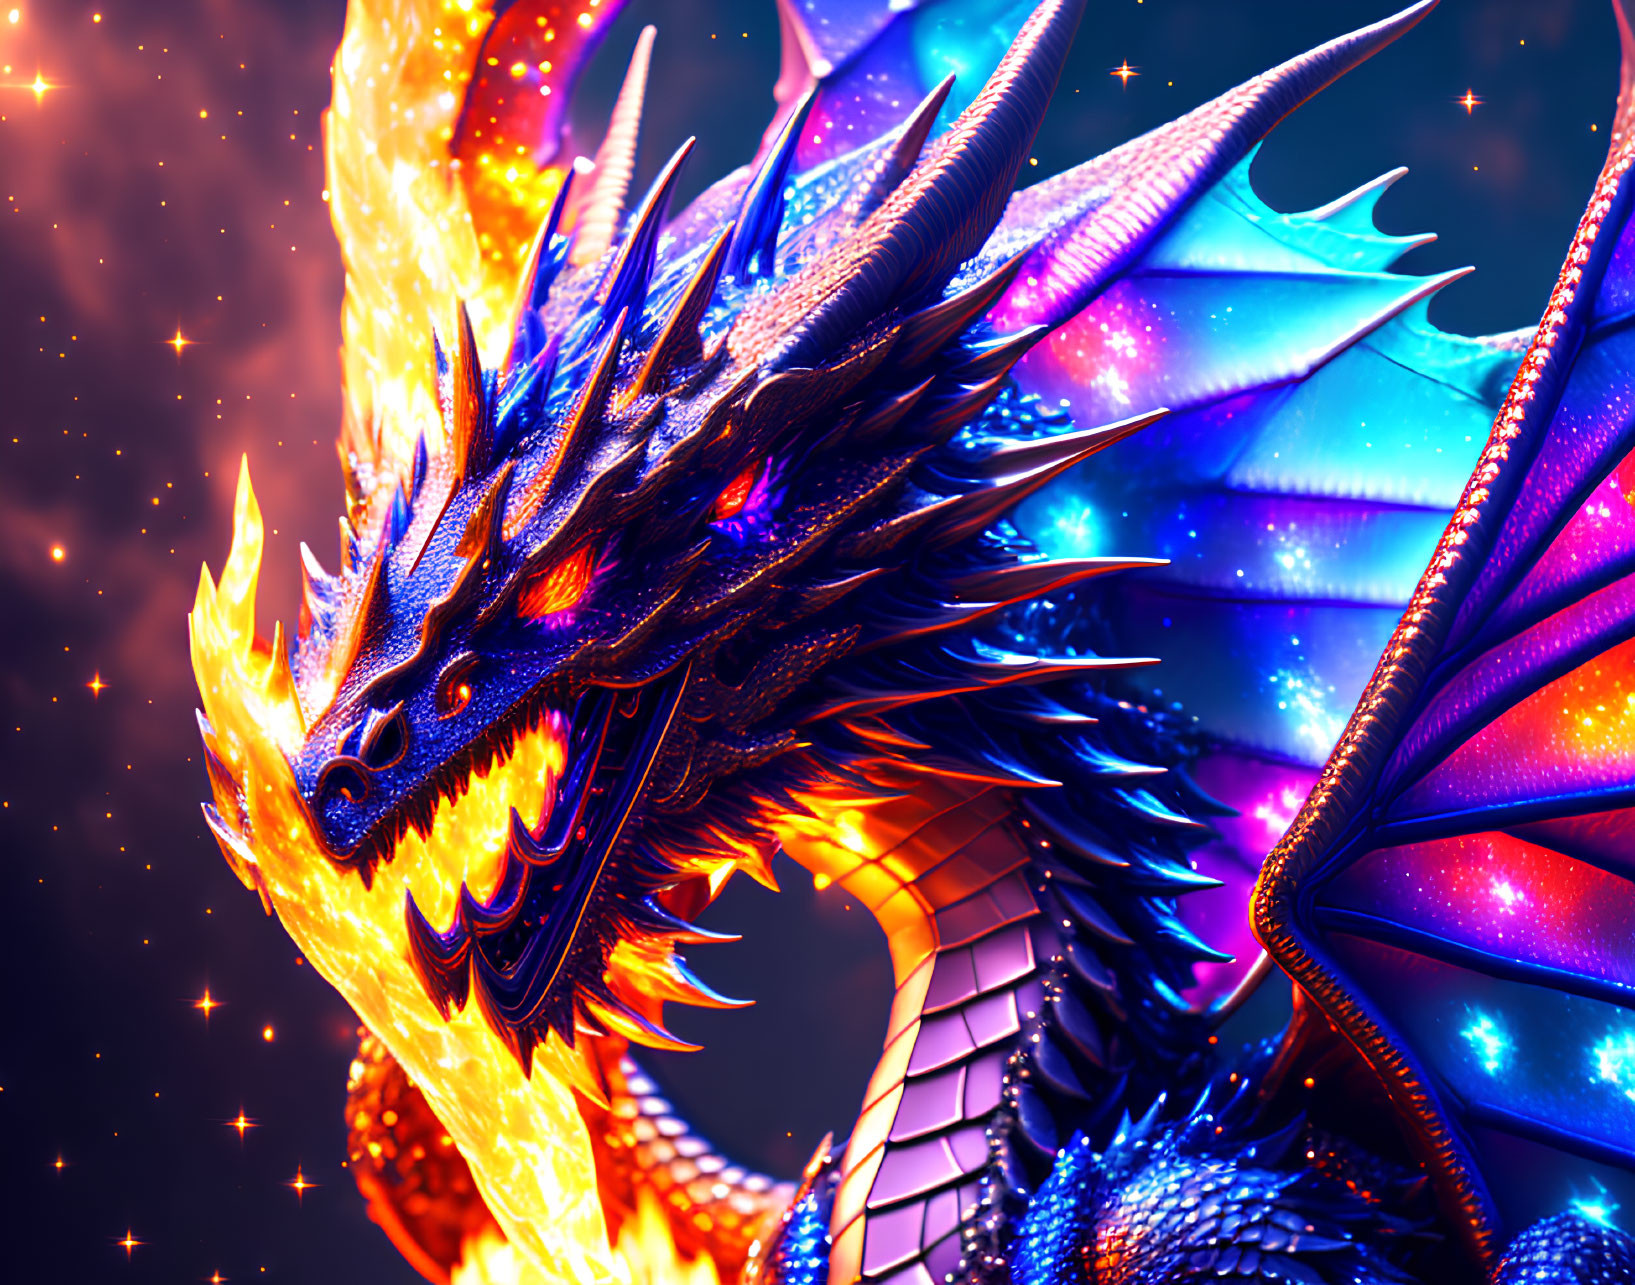 Colorful Dragon with Glowing Eyes in Cosmic Setting